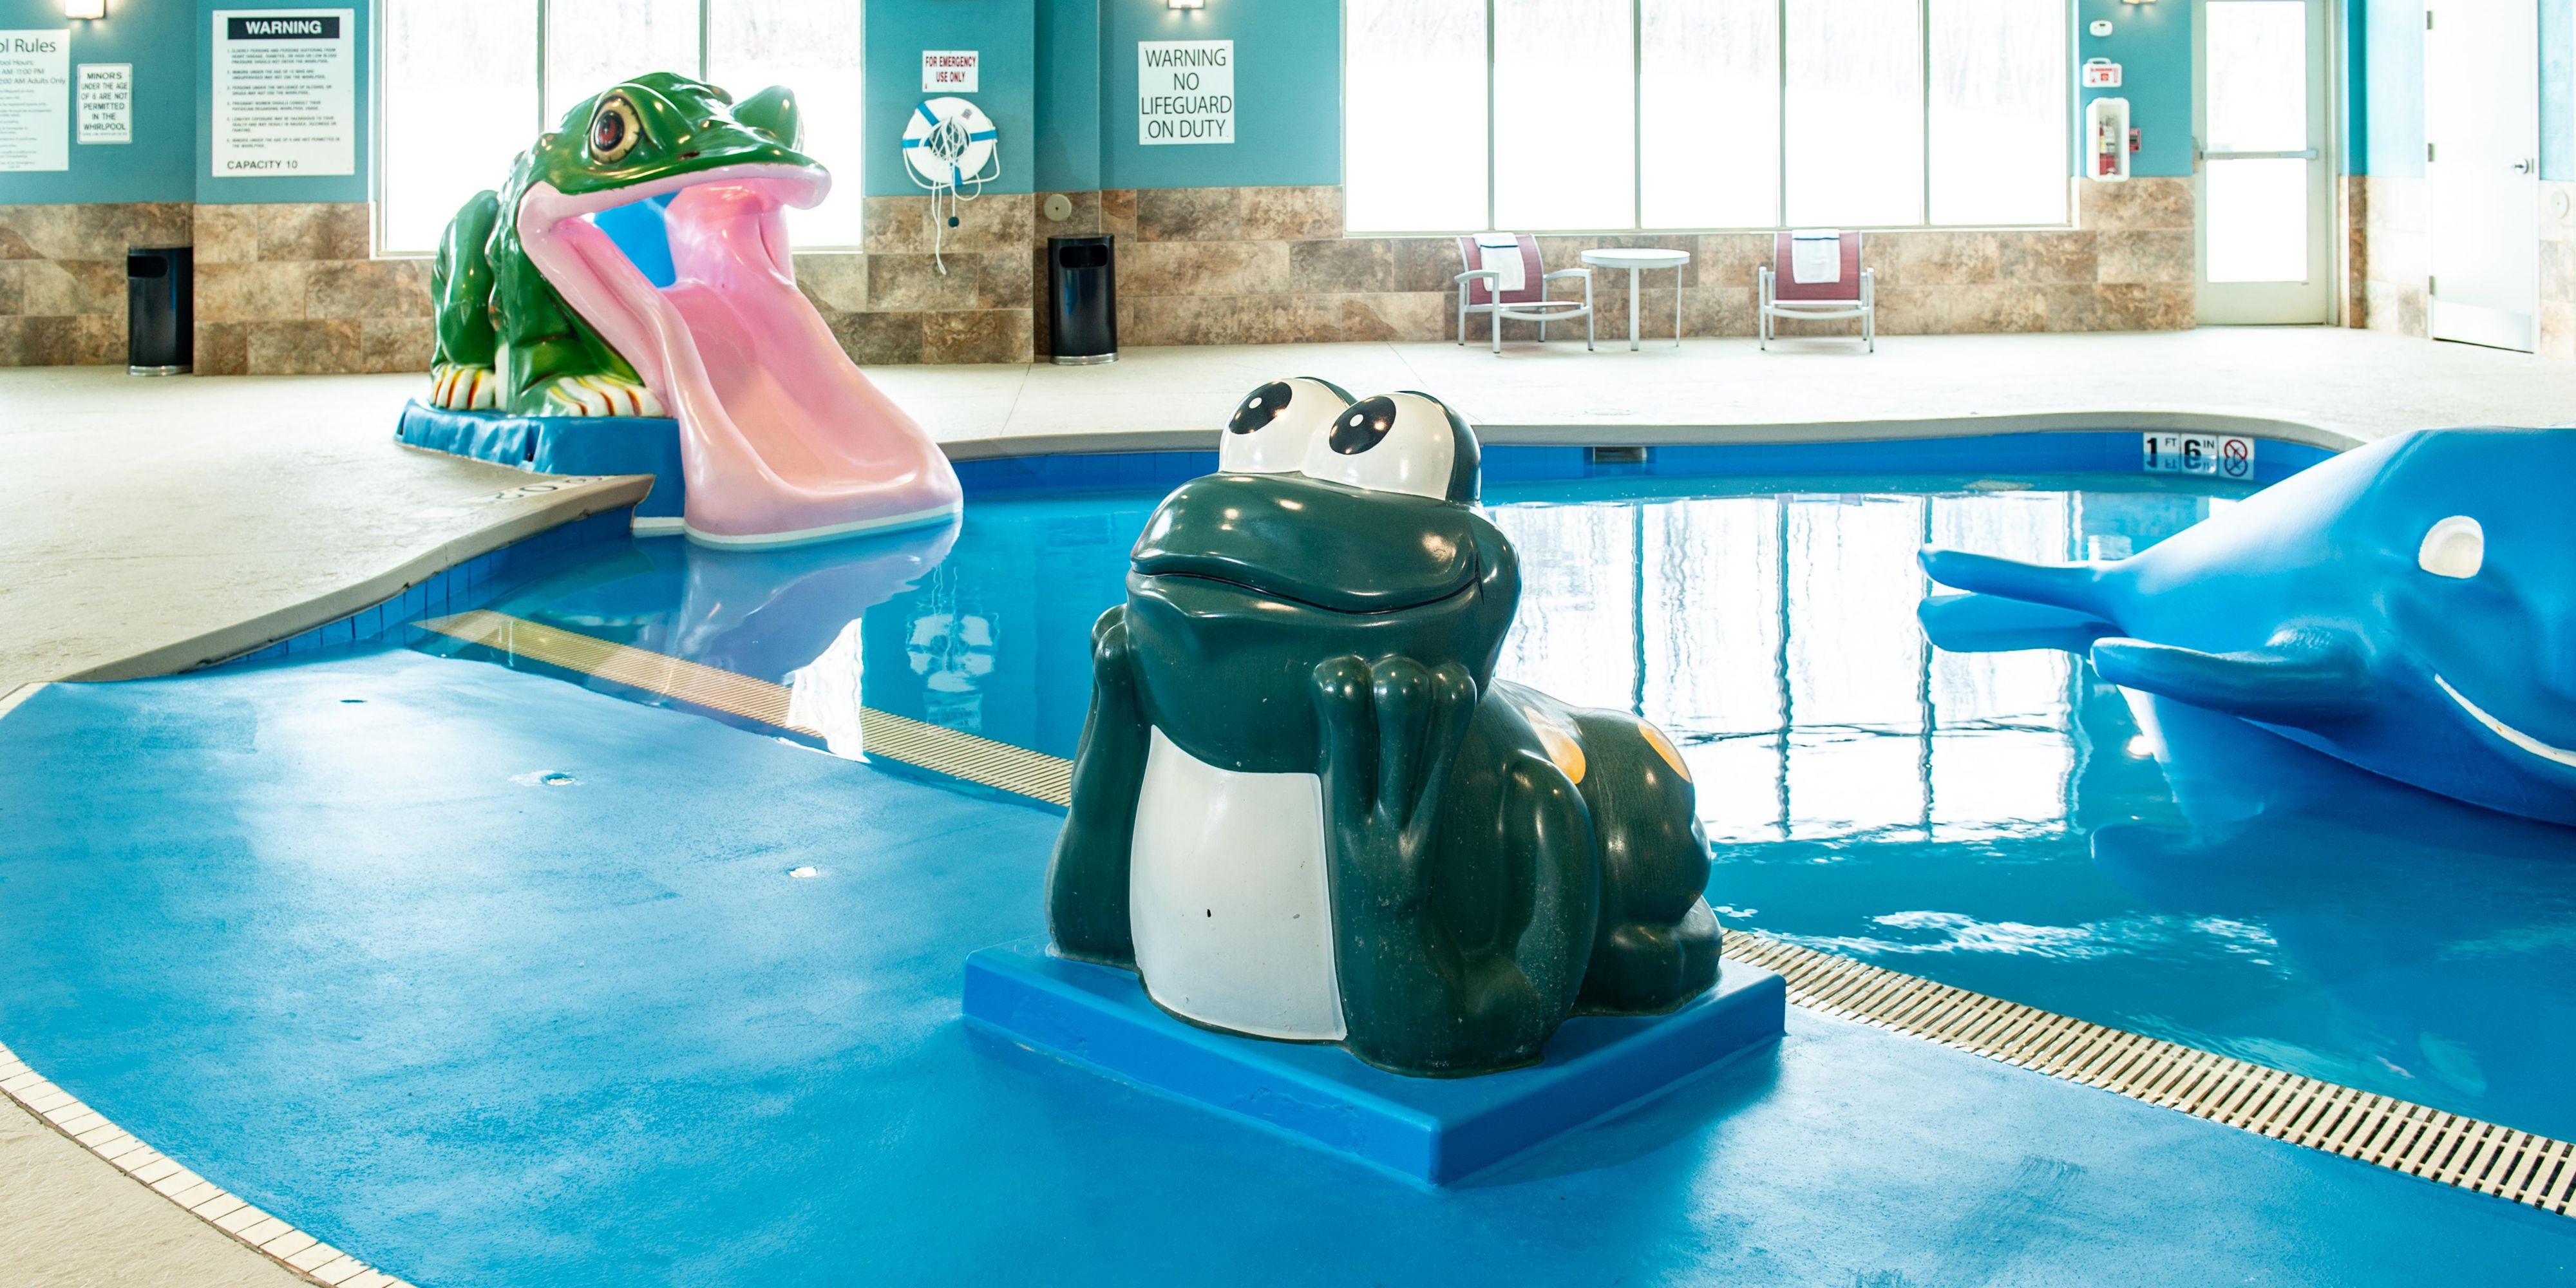 Our hotel is perfect for family's looking to get away for the night. Our indoor pool with a hot tub also features a children's pool and frog slide for small children.